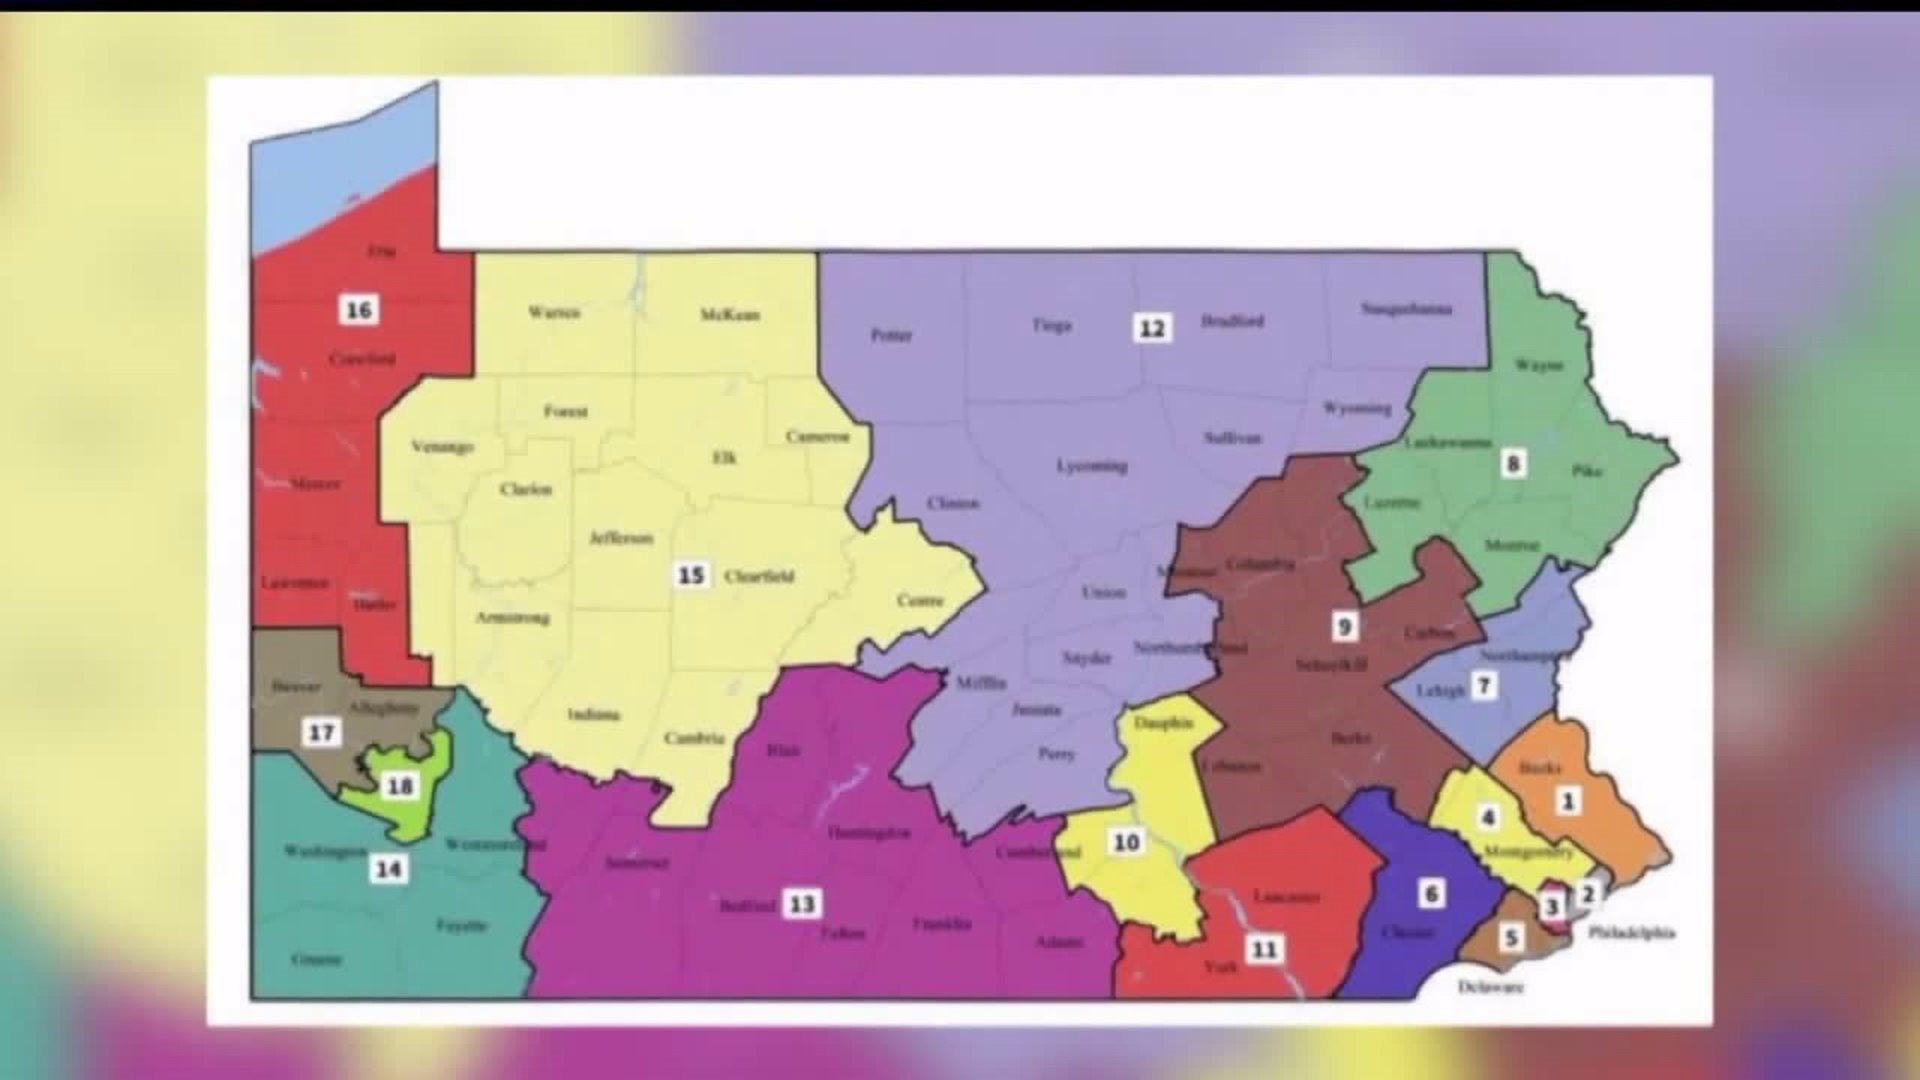 The state government committee will hold a public hearing today to discuss PA`s redistricting process